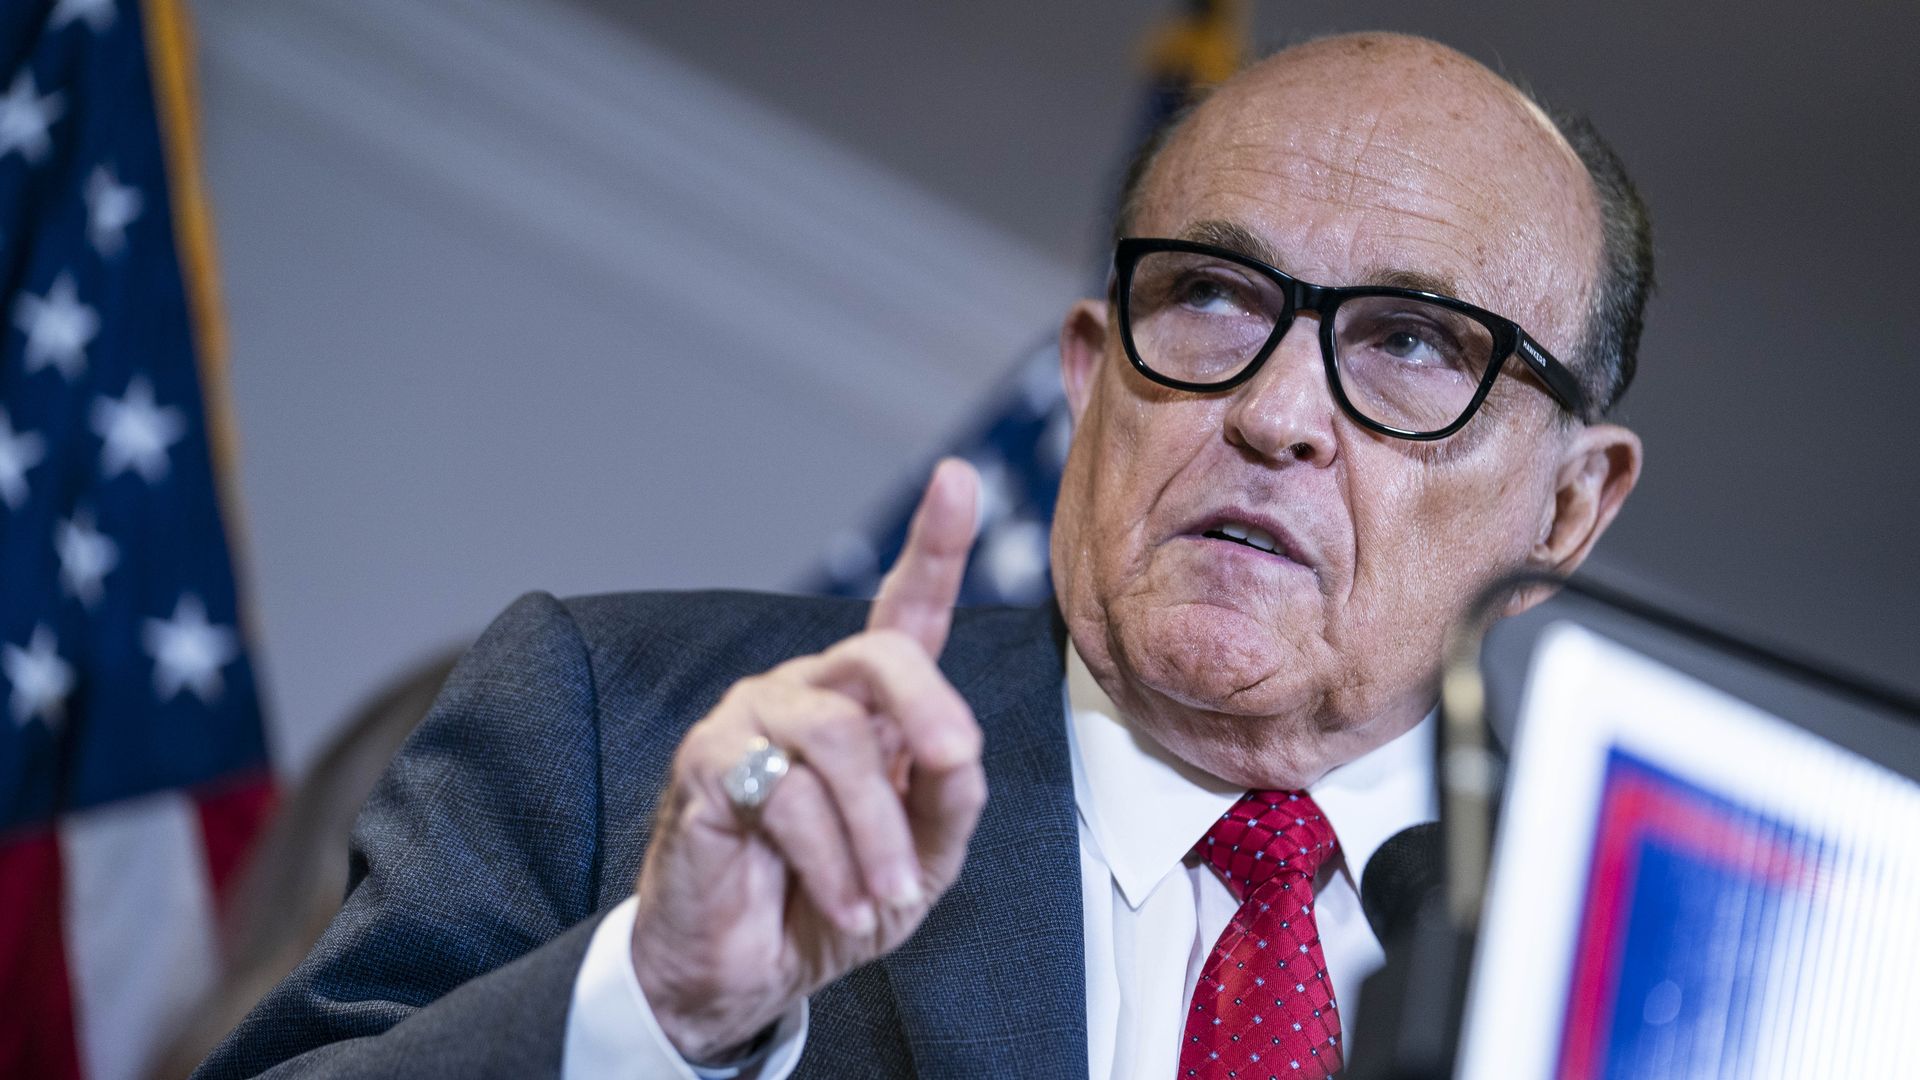 Former New York Mayor Rudy Giuliani, attorney for US President Donald Trump, speaks during a press conference.